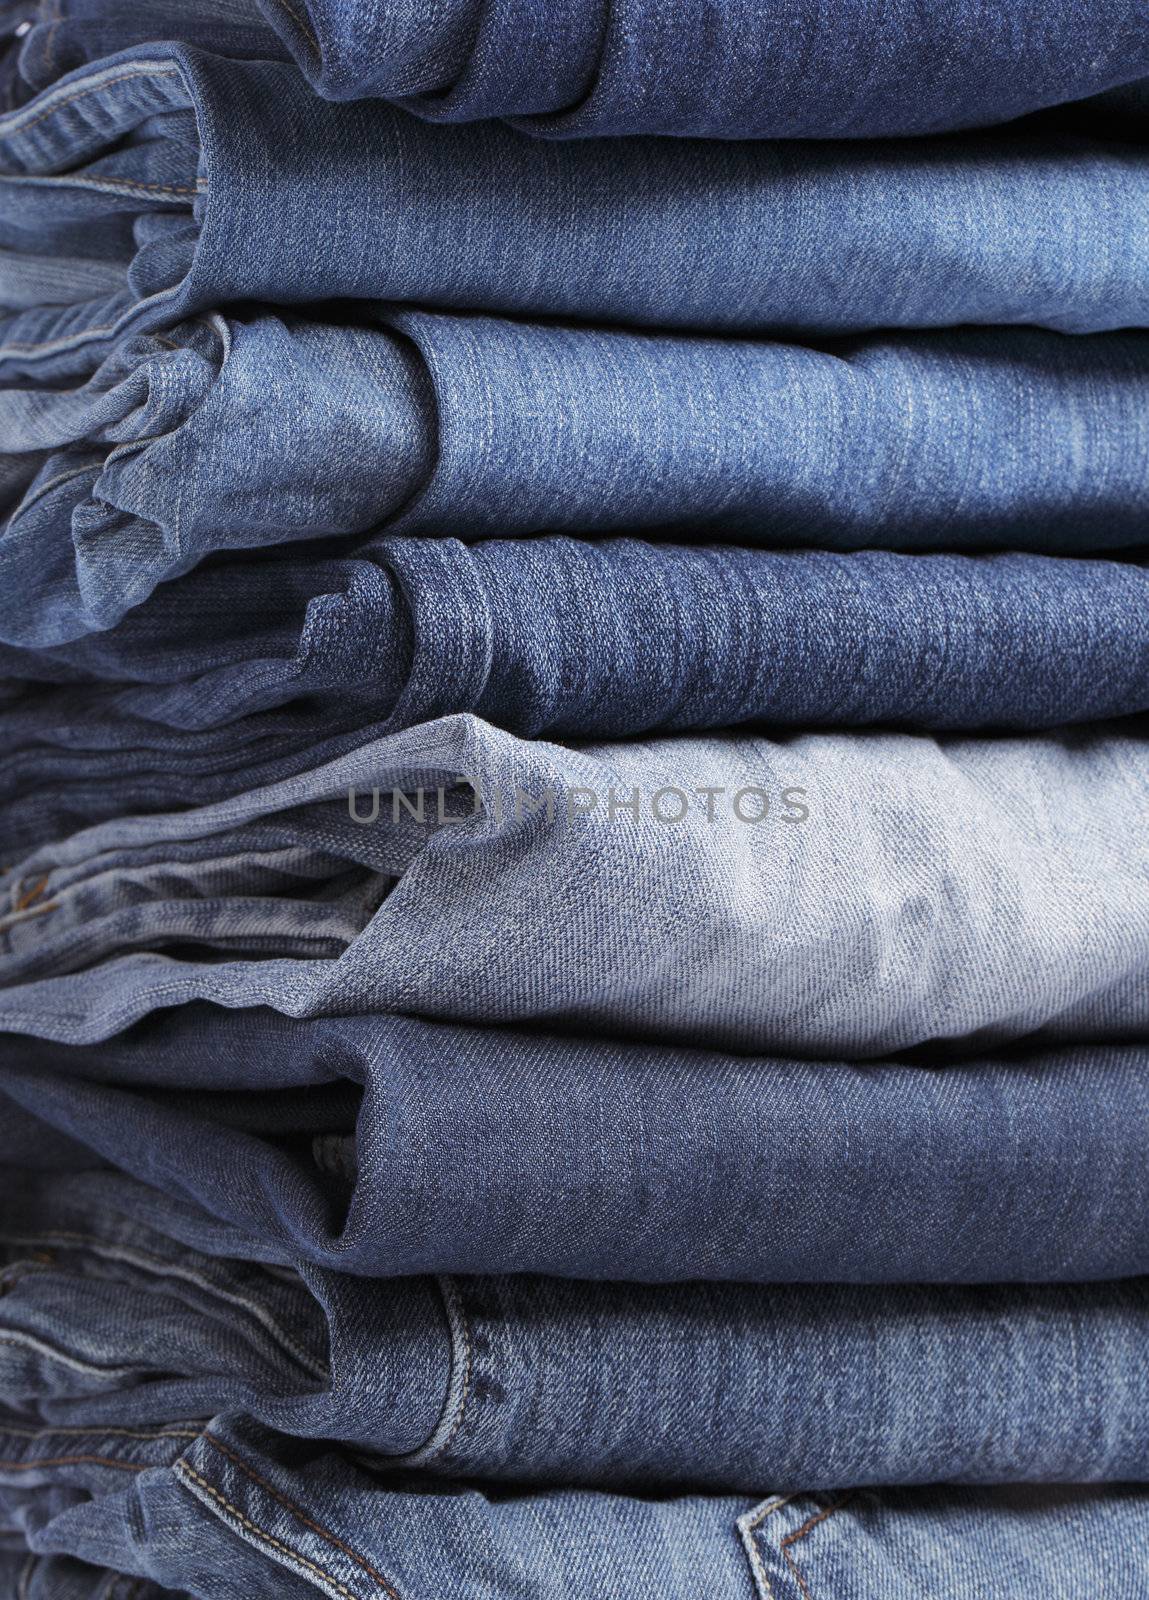 Jeans by Stocksnapper